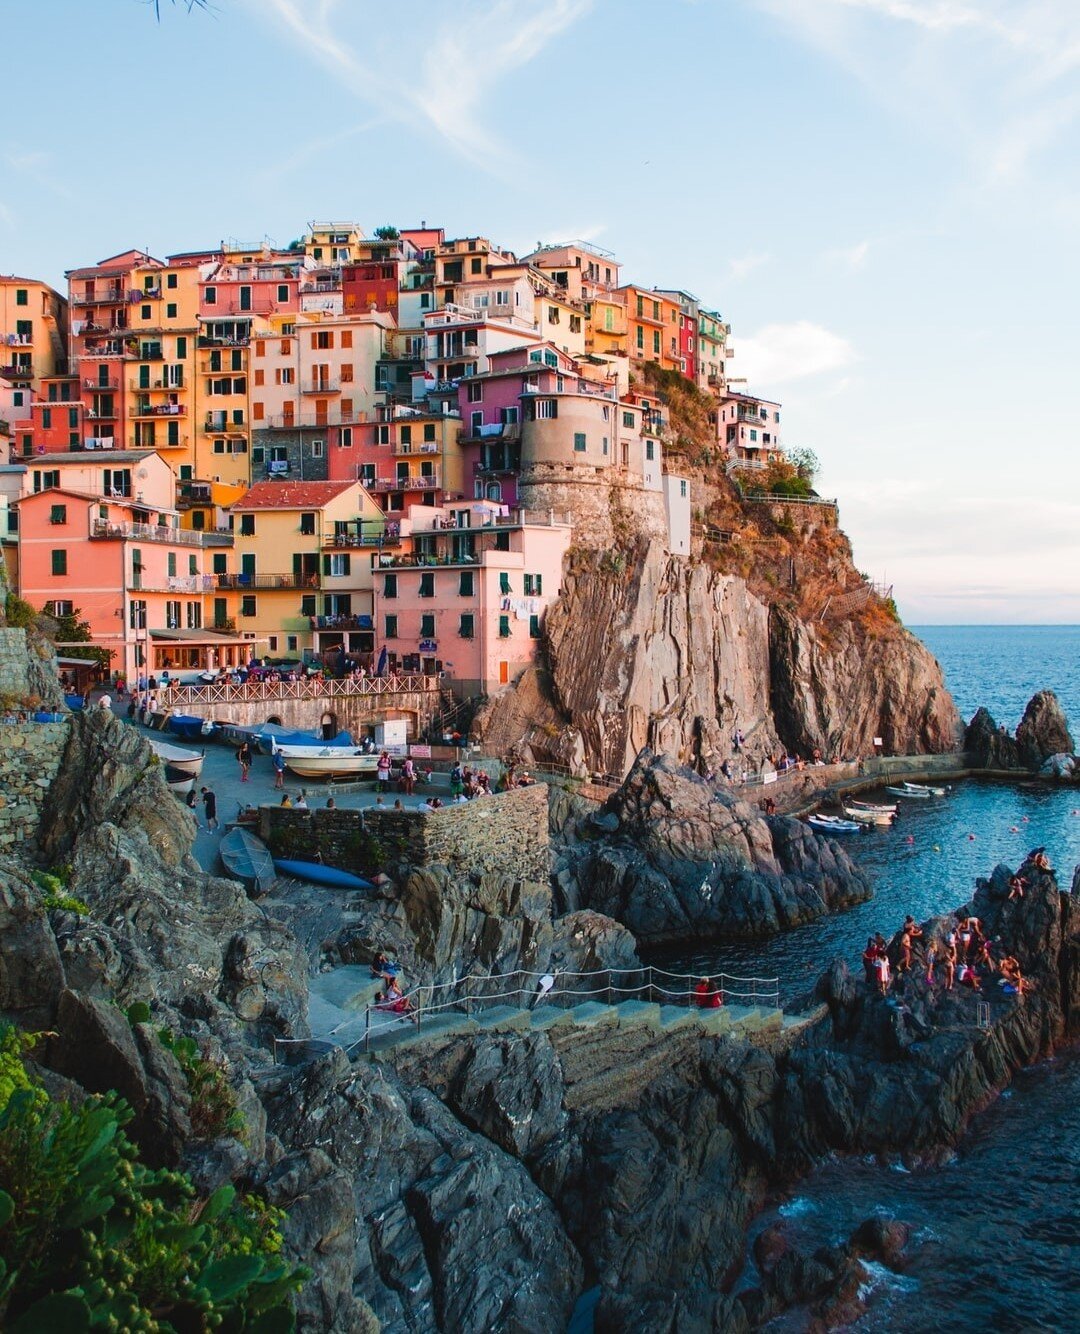 Is it just me or does coffee just taste better when you&rsquo;re on vacation?⁠
⁠
I&rsquo;m sipping my morning cup of java then getting started on an itinerary for a family getaway to Italy, the Cinque Terre will definitely be on the list of suggested